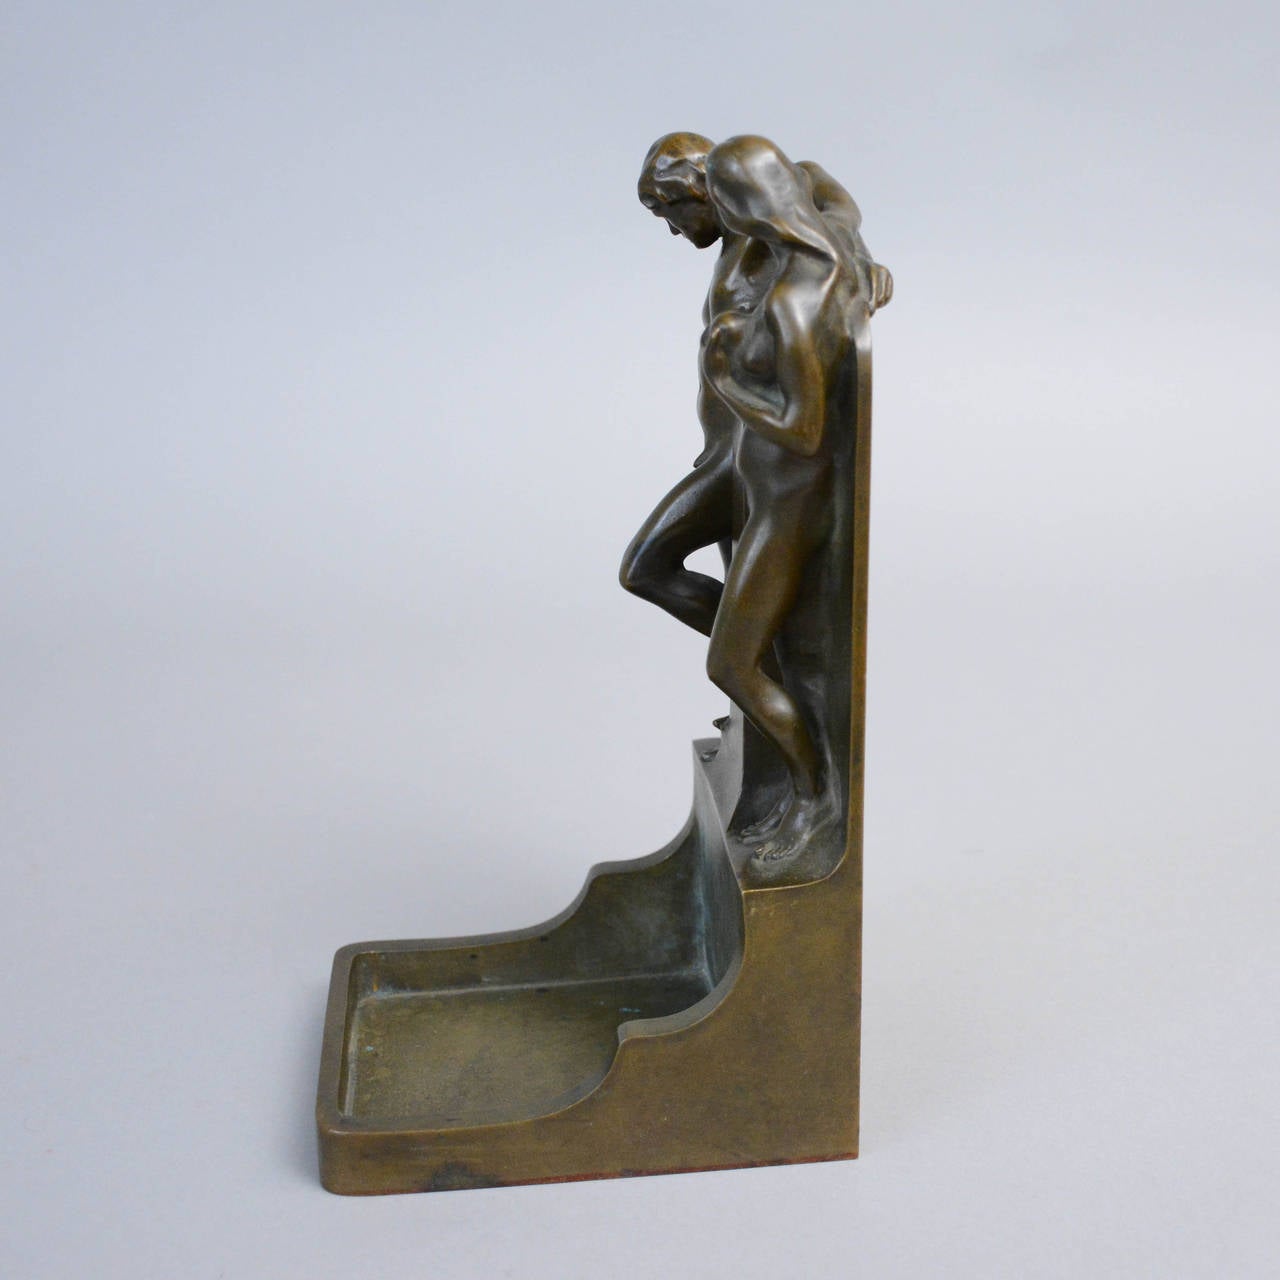 Cast bronze bookend by Johan John Runer for Otto Meyer foundry, Stockholm Sweden.  Dated 1917.